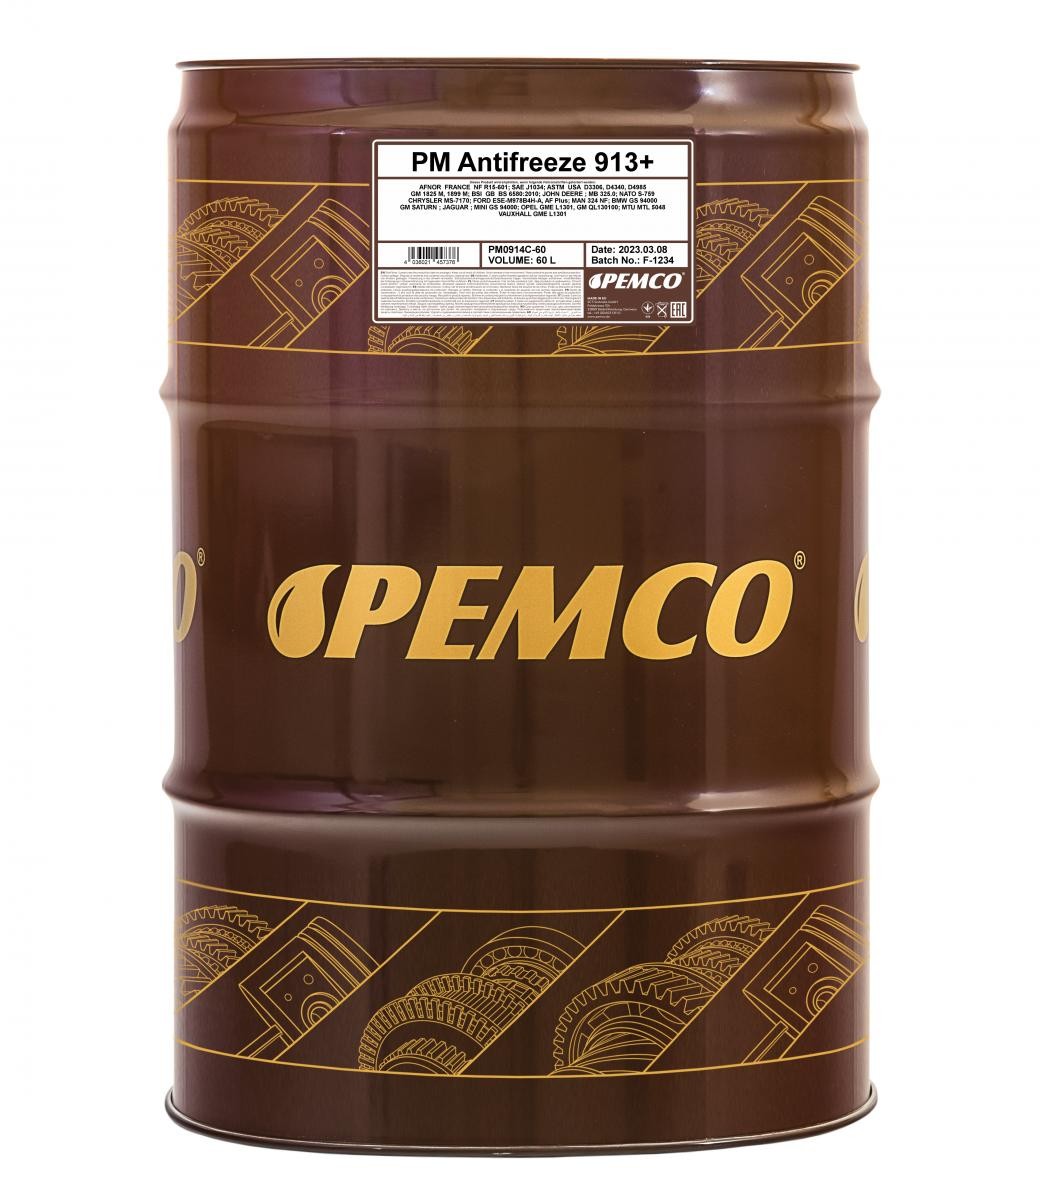 PEMCO Antifreeze 913+, Concentrate G13 yellow, 60l, -38(50/50) G13 Coolant PM0914C-60 buy